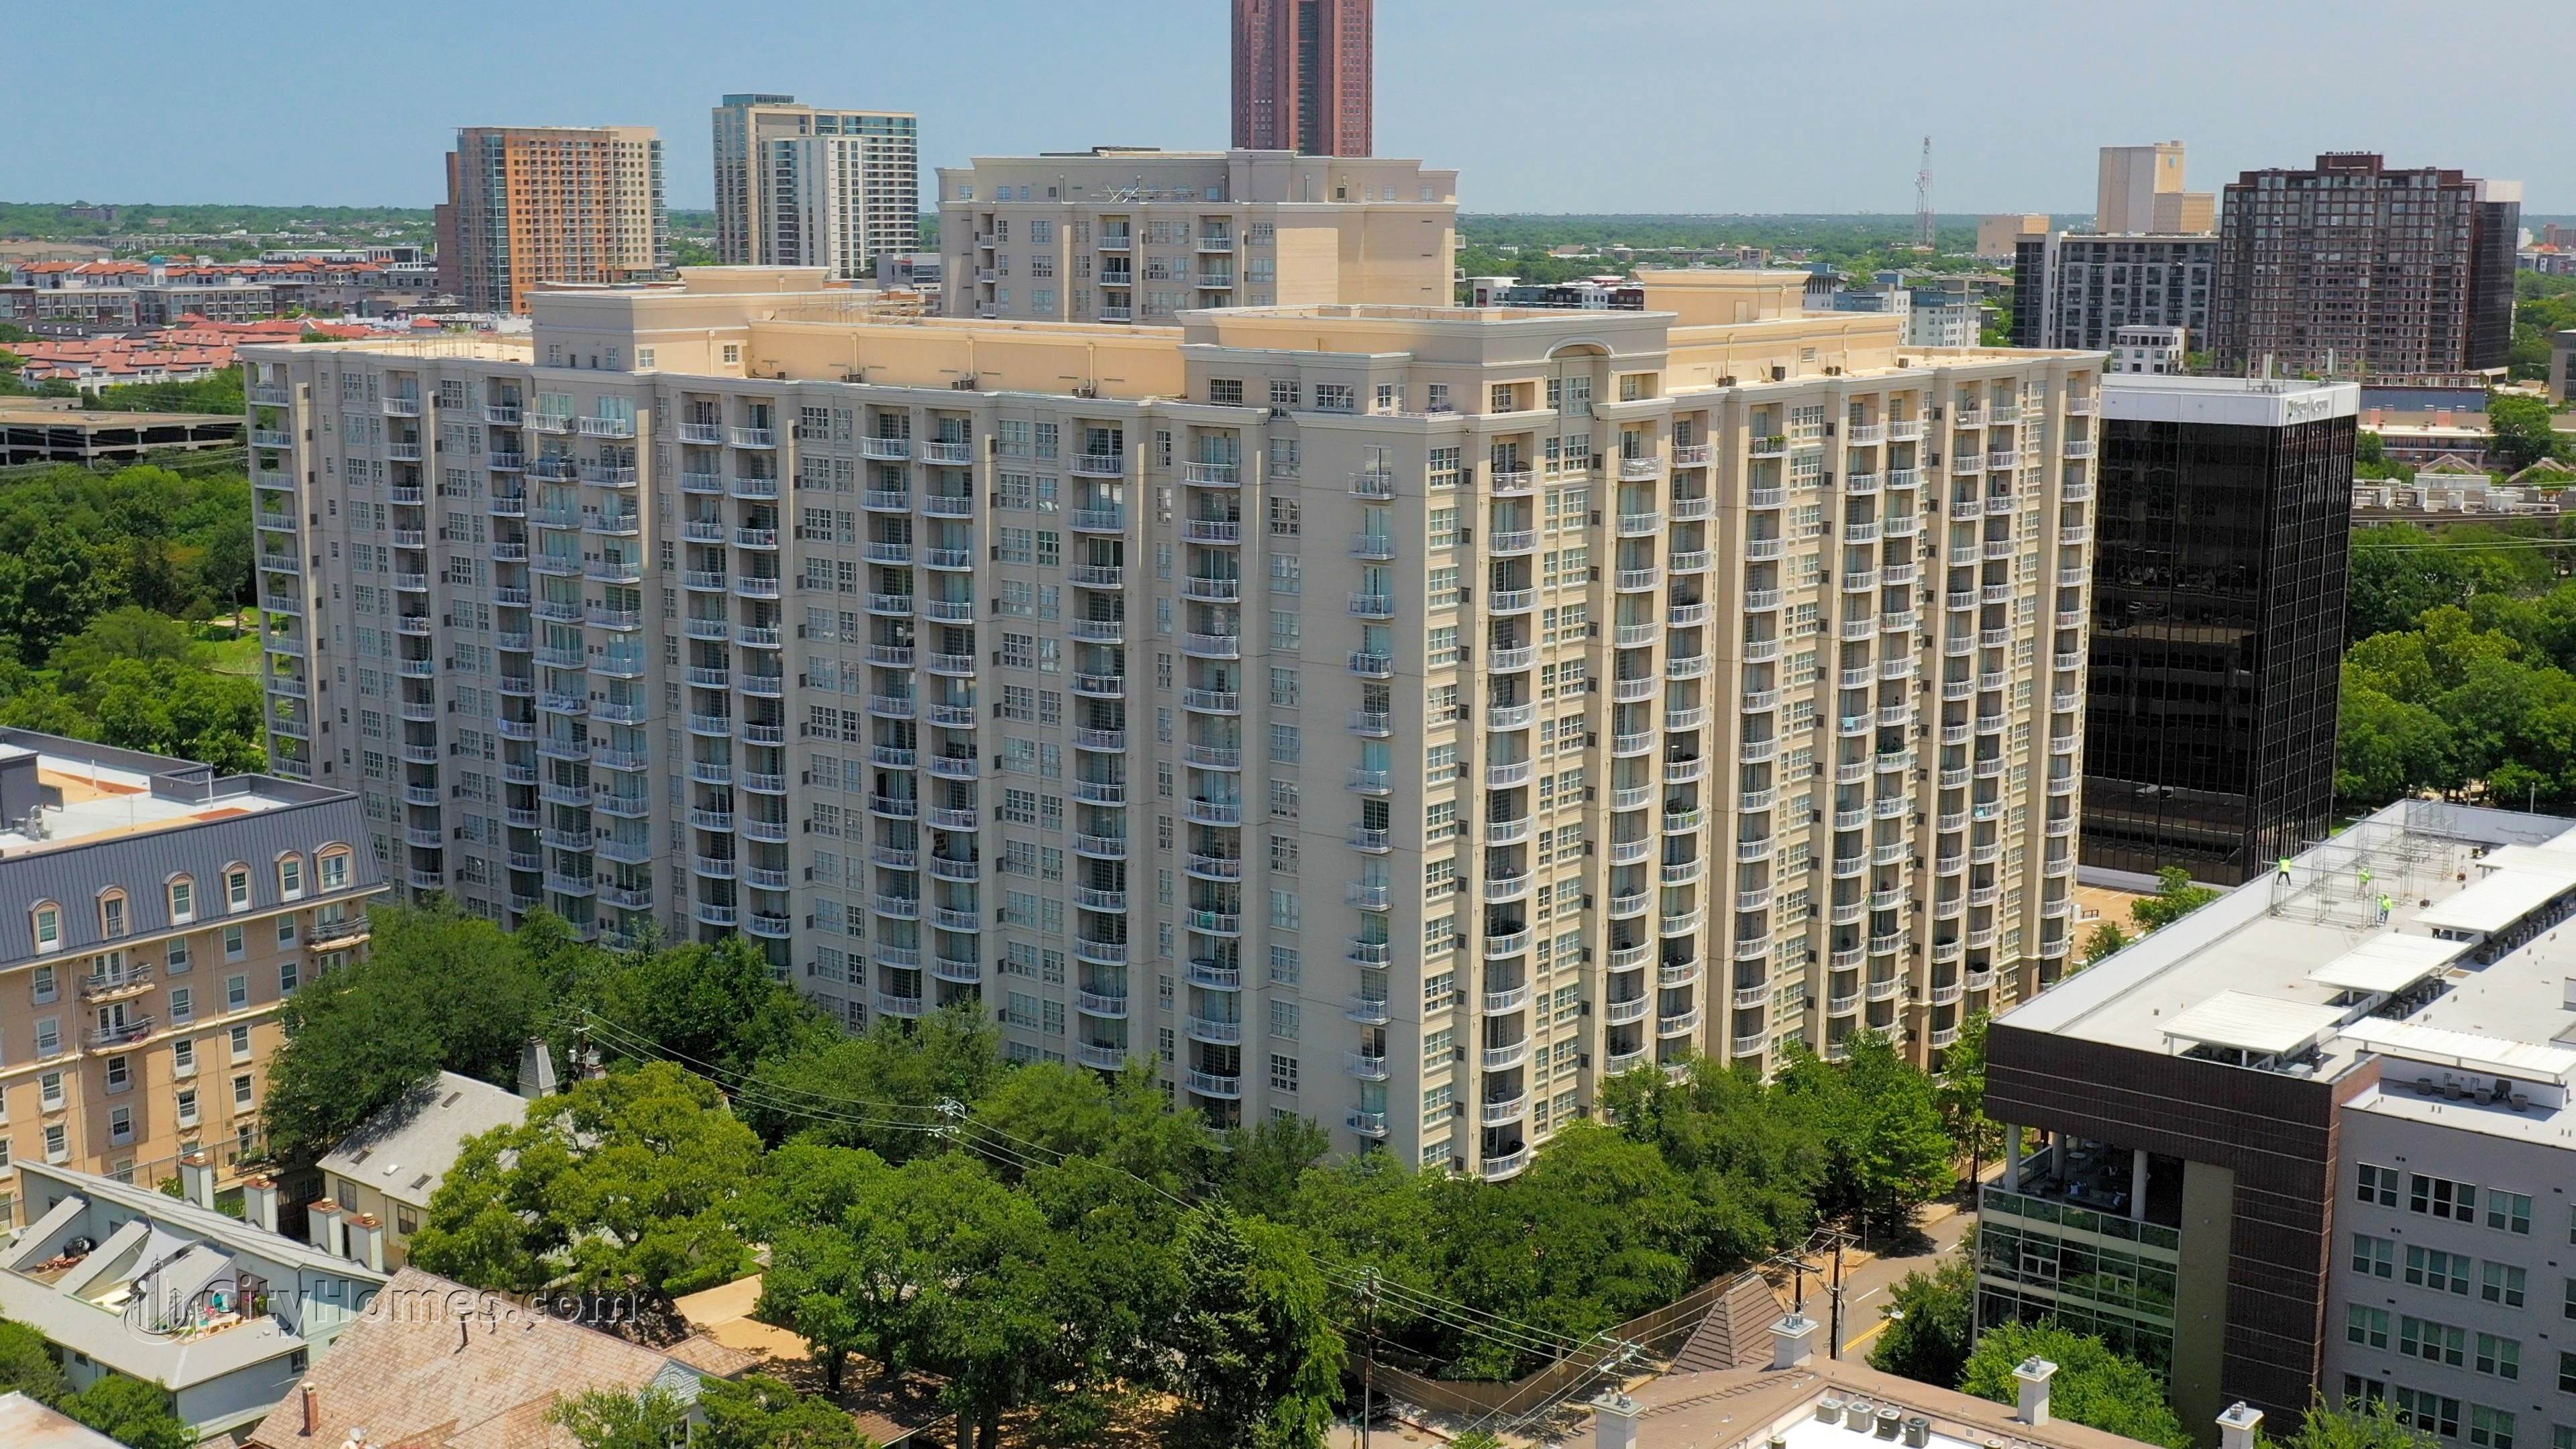 4. The Mayfair building at 3401 Lee Pkwy, Turtle Creek, Dallas, TX 75219